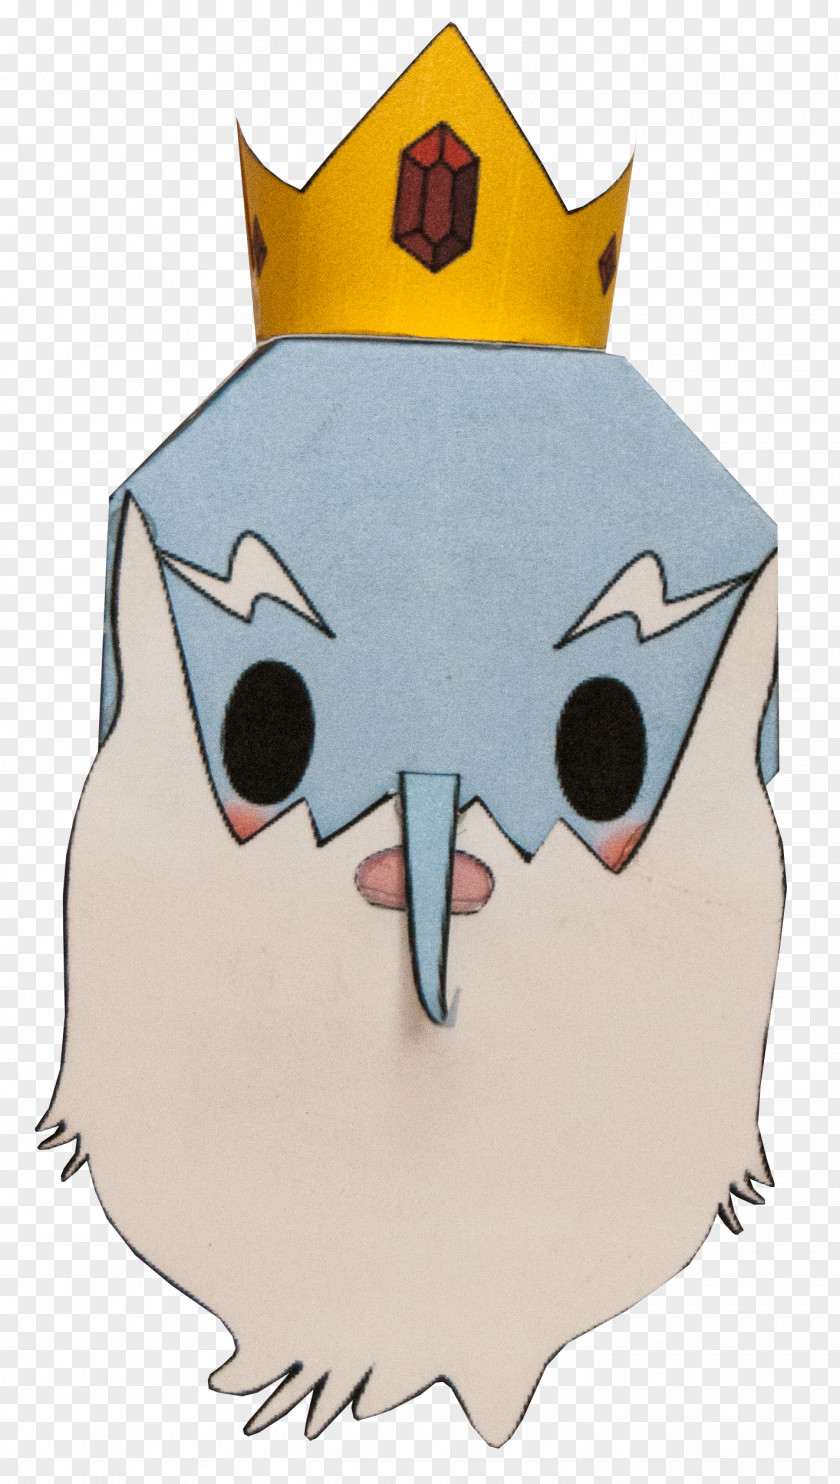 Finn The Human Ice King Marceline Vampire Queen Paper Flame Princess PNG